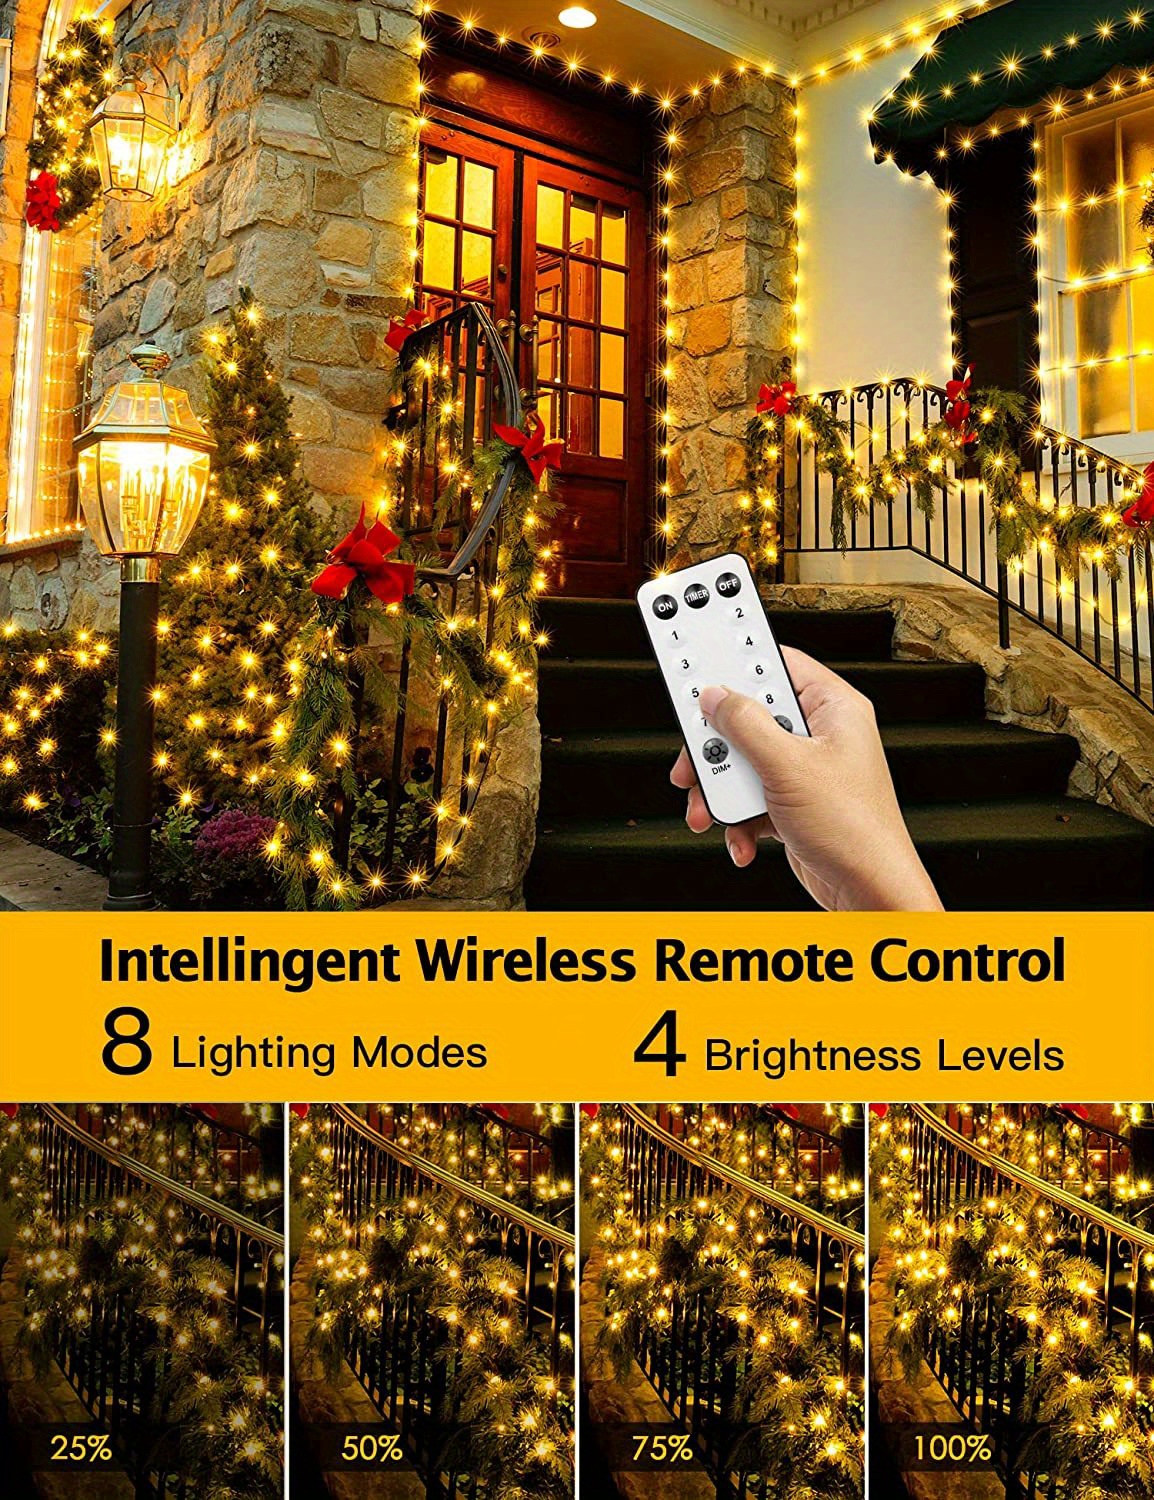 1 set 1000 led christmas lights 405ft outdoor string lights plug in fairy lights green wire with remote timer 8 lighting modes decorations lights for tree xmas indoor wedding garden multi colored warm white cool white details 1